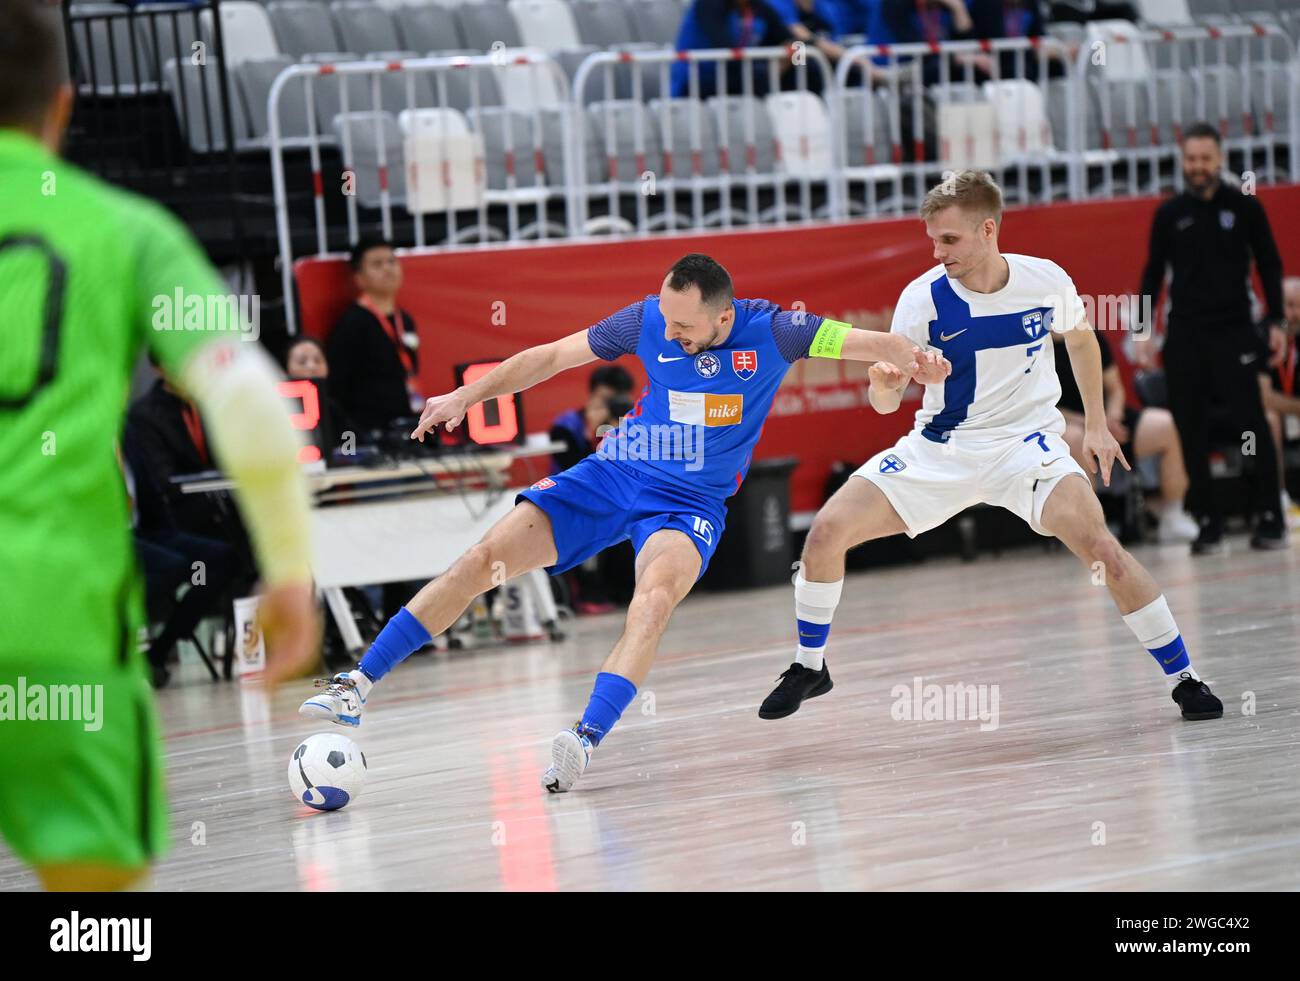 Xi'an, China's Shaanxi Province. 4th Feb, 2024. Slovakia's Drahovsky Tomas (L) vies with Finland's Tero Intala during a match between Finland and Slovakia at the CFA 'Yulin Tourism Investment' Cup Futsal International Tournament 2024 in Xi'an, northwest China's Shaanxi Province, Feb. 4, 2024. Credit: Li Yibo/Xinhua/Alamy Live News Stock Photo